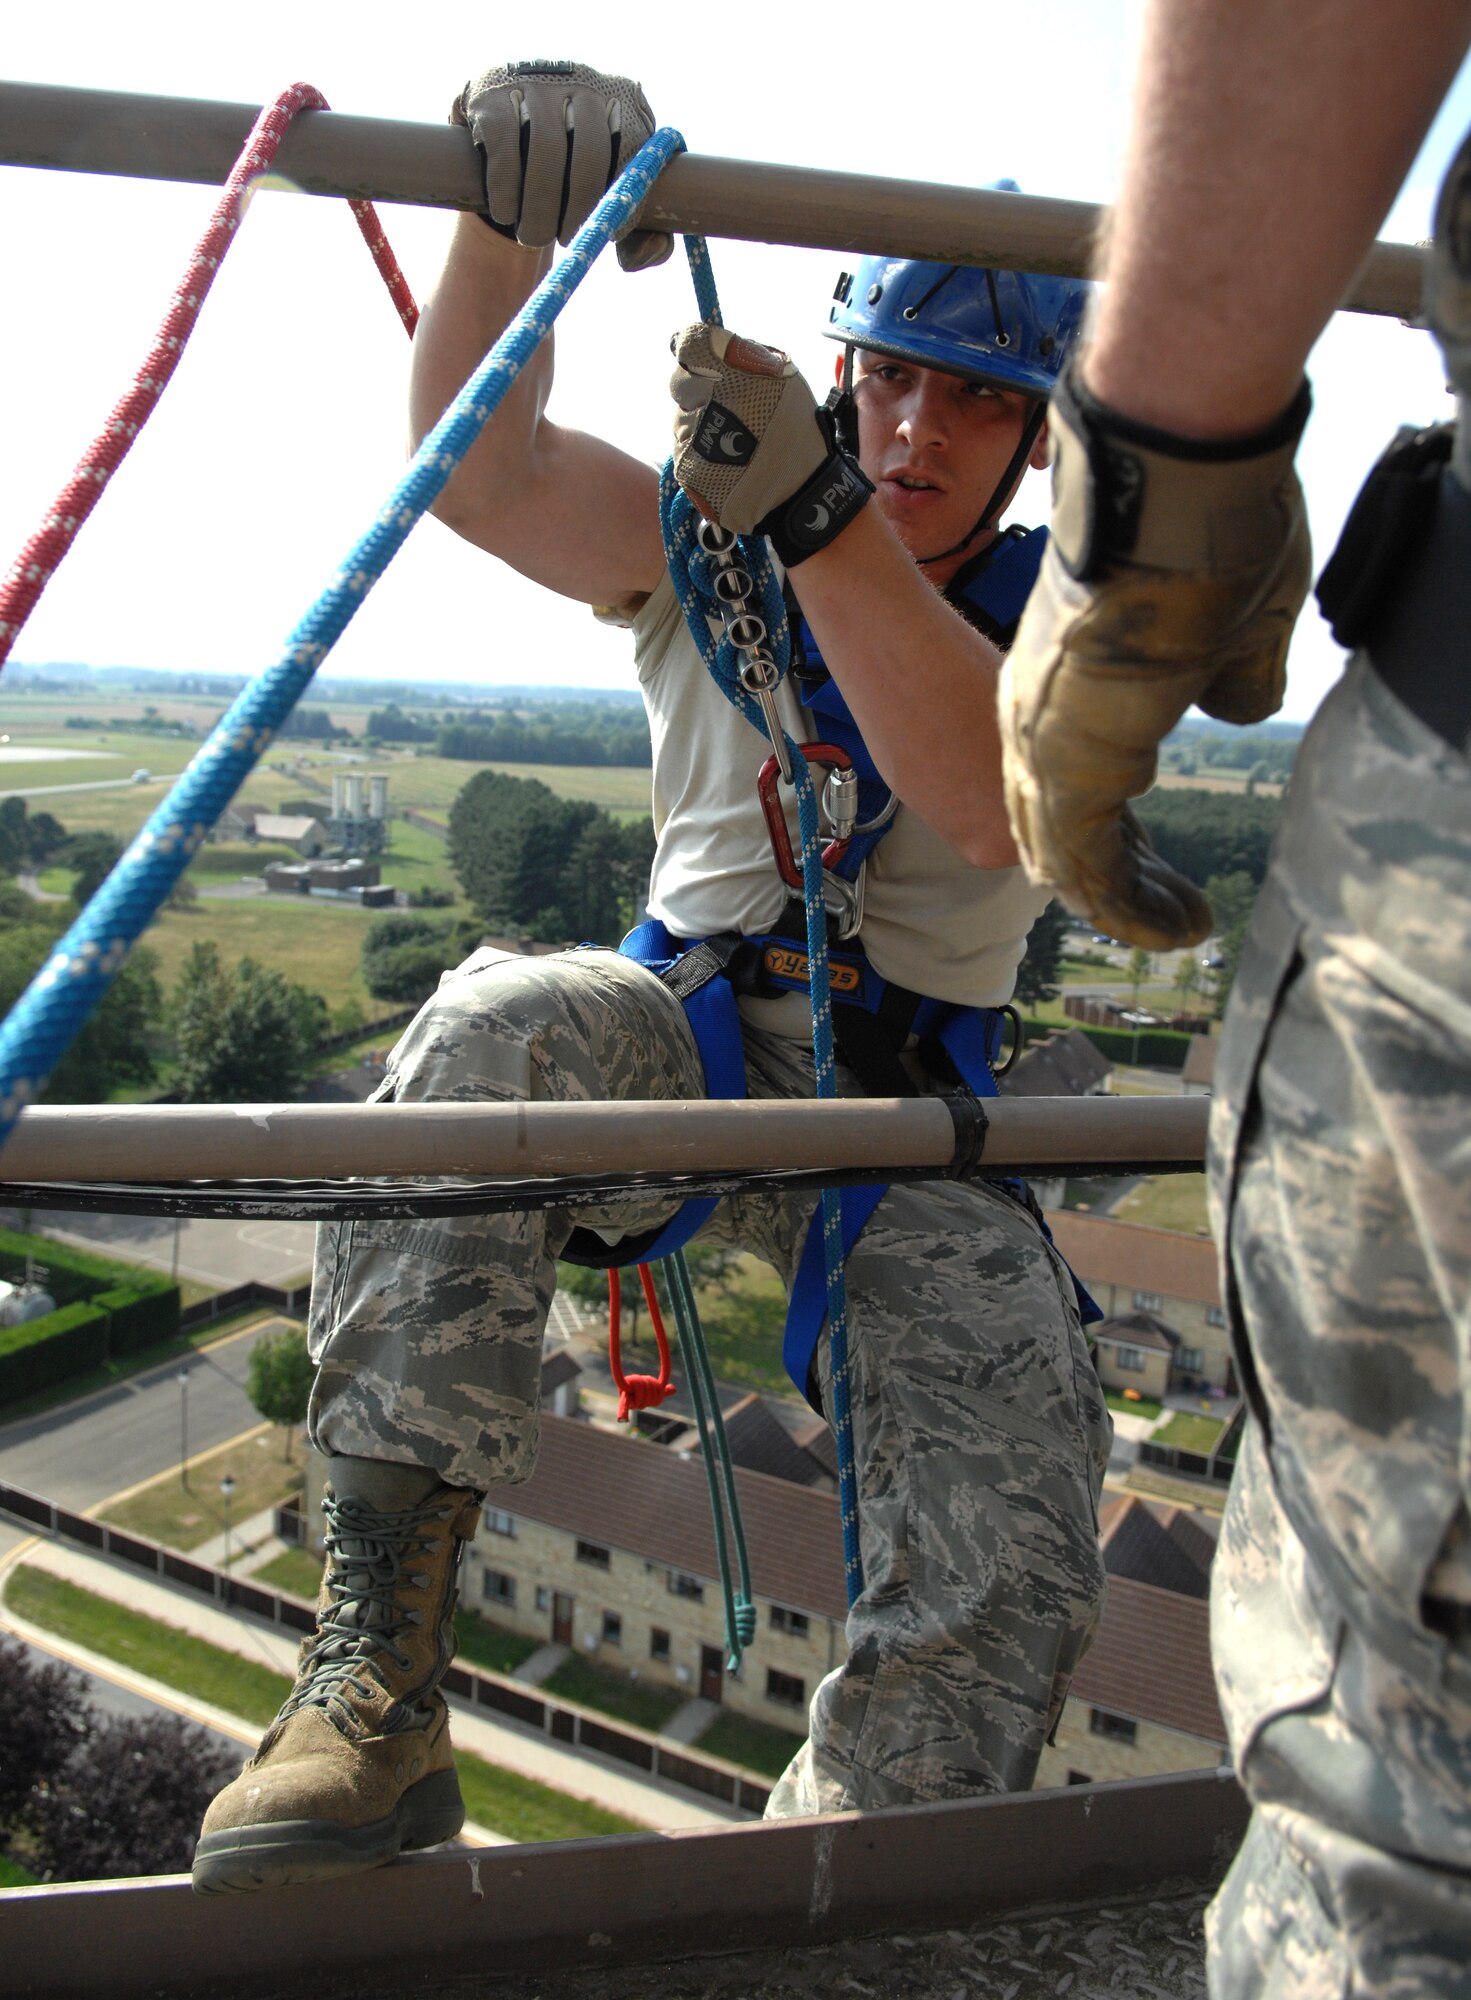 U.S. Air Force Airman 1st Class Jacob Dietmeyer, 100th Civil Engineer Squadron Fire Department firefighter from Gurnee, Ill., climbs the railing of a water tower before rappelling Sept. 4, 2013, on RAF Mildenhall, England. Rappelling involves at least two people, one of which performs the actual rappelling, while the other feeds a safety line down in case the person rappelling begins to fall. The water tower from which the firefighters rappelled is 118 feet tall, almost three stories higher than what the firefighters normally train on. (U.S. Air Force photo by Airman 1st Class Dillon Johnston/Released)